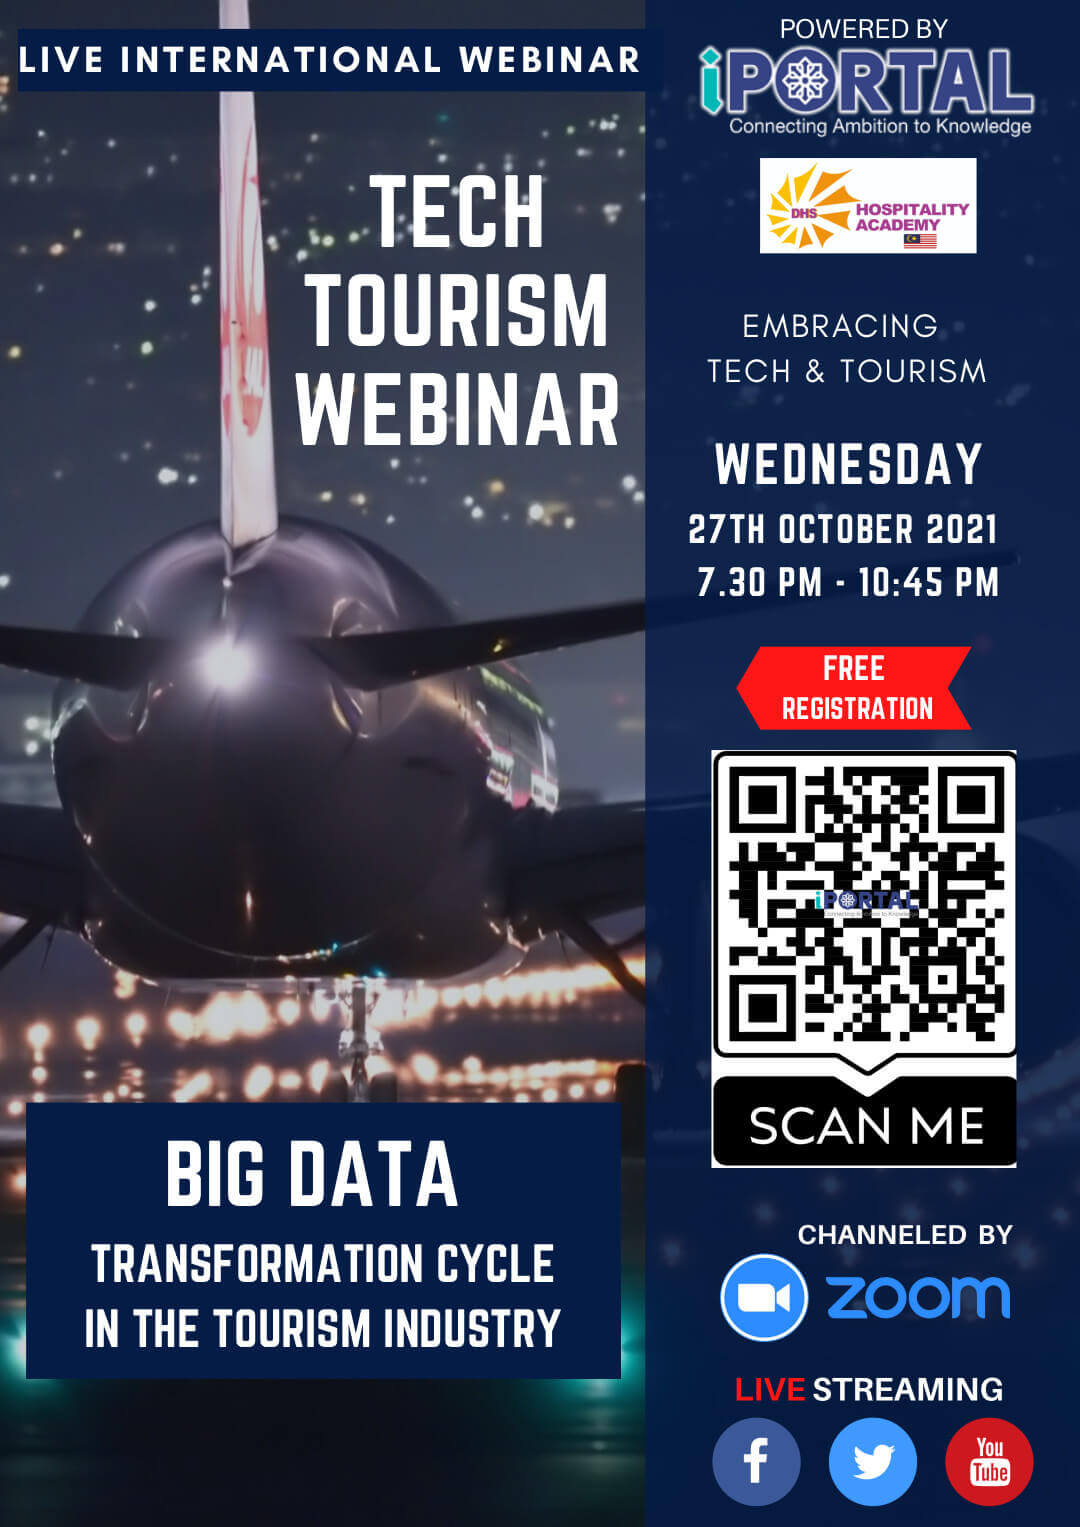 tech-tourism-webinar-big-data-transformation-cycle-in-the-tourism-industry-october-27-2021